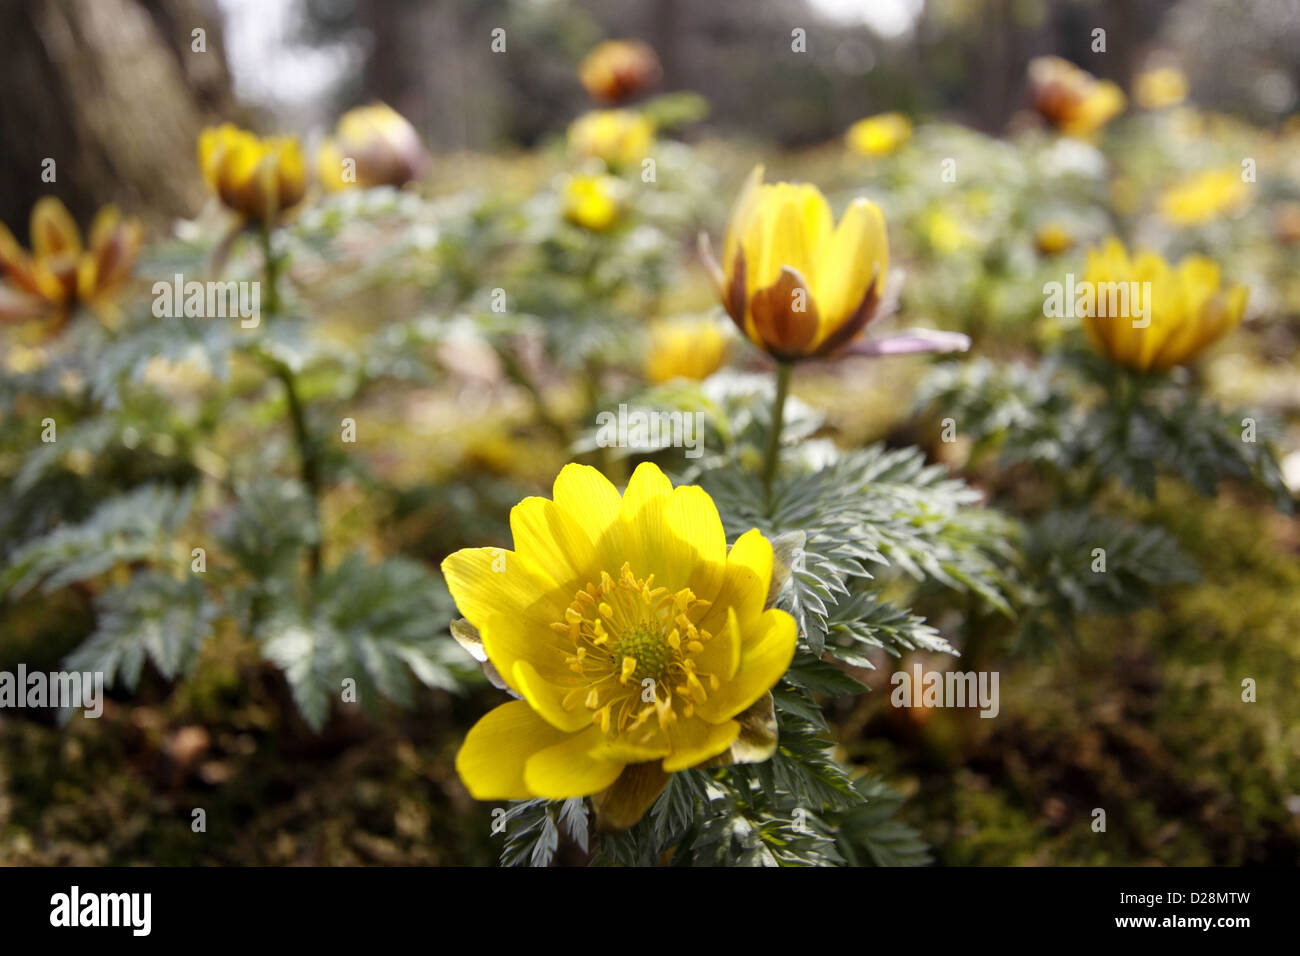 Adonis Flowers High Resolution Stock Photography and Images - Alamy